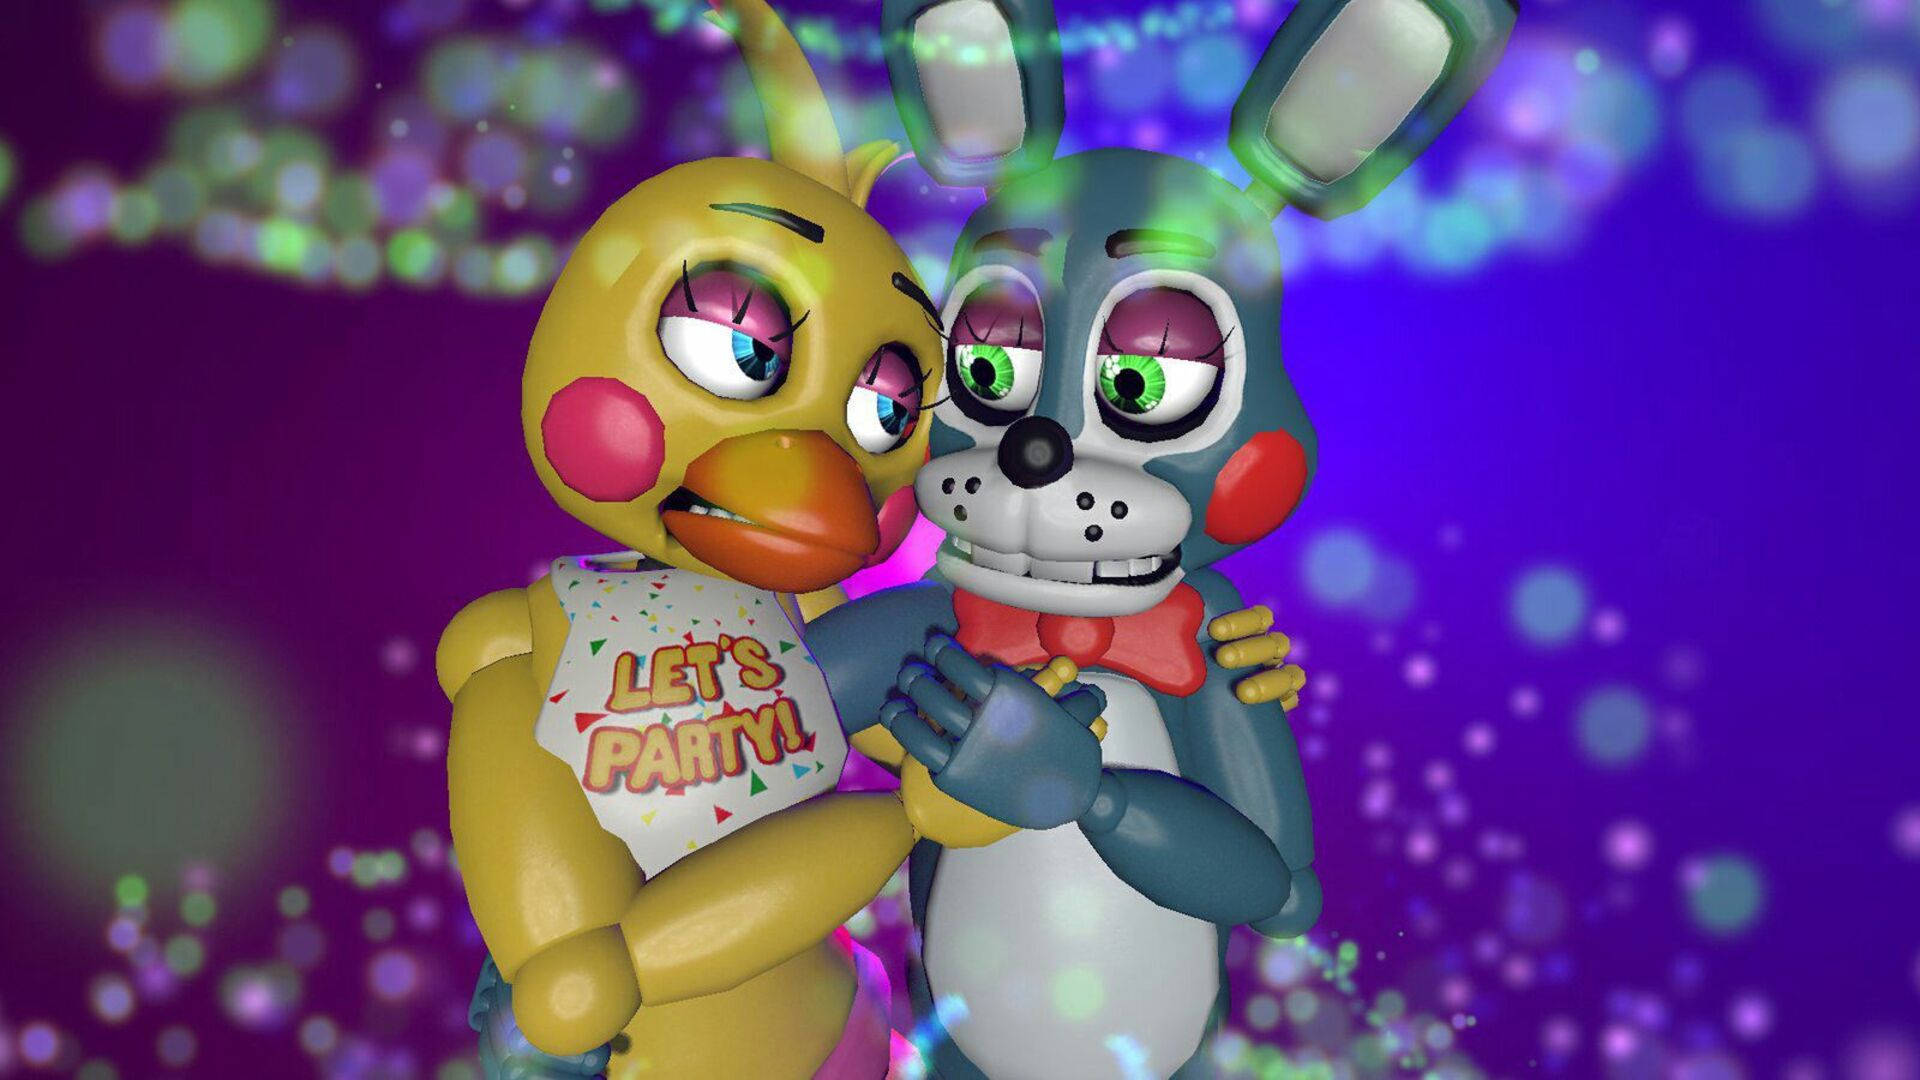 FNAF Chica And Bonnie Couple Wallpaper